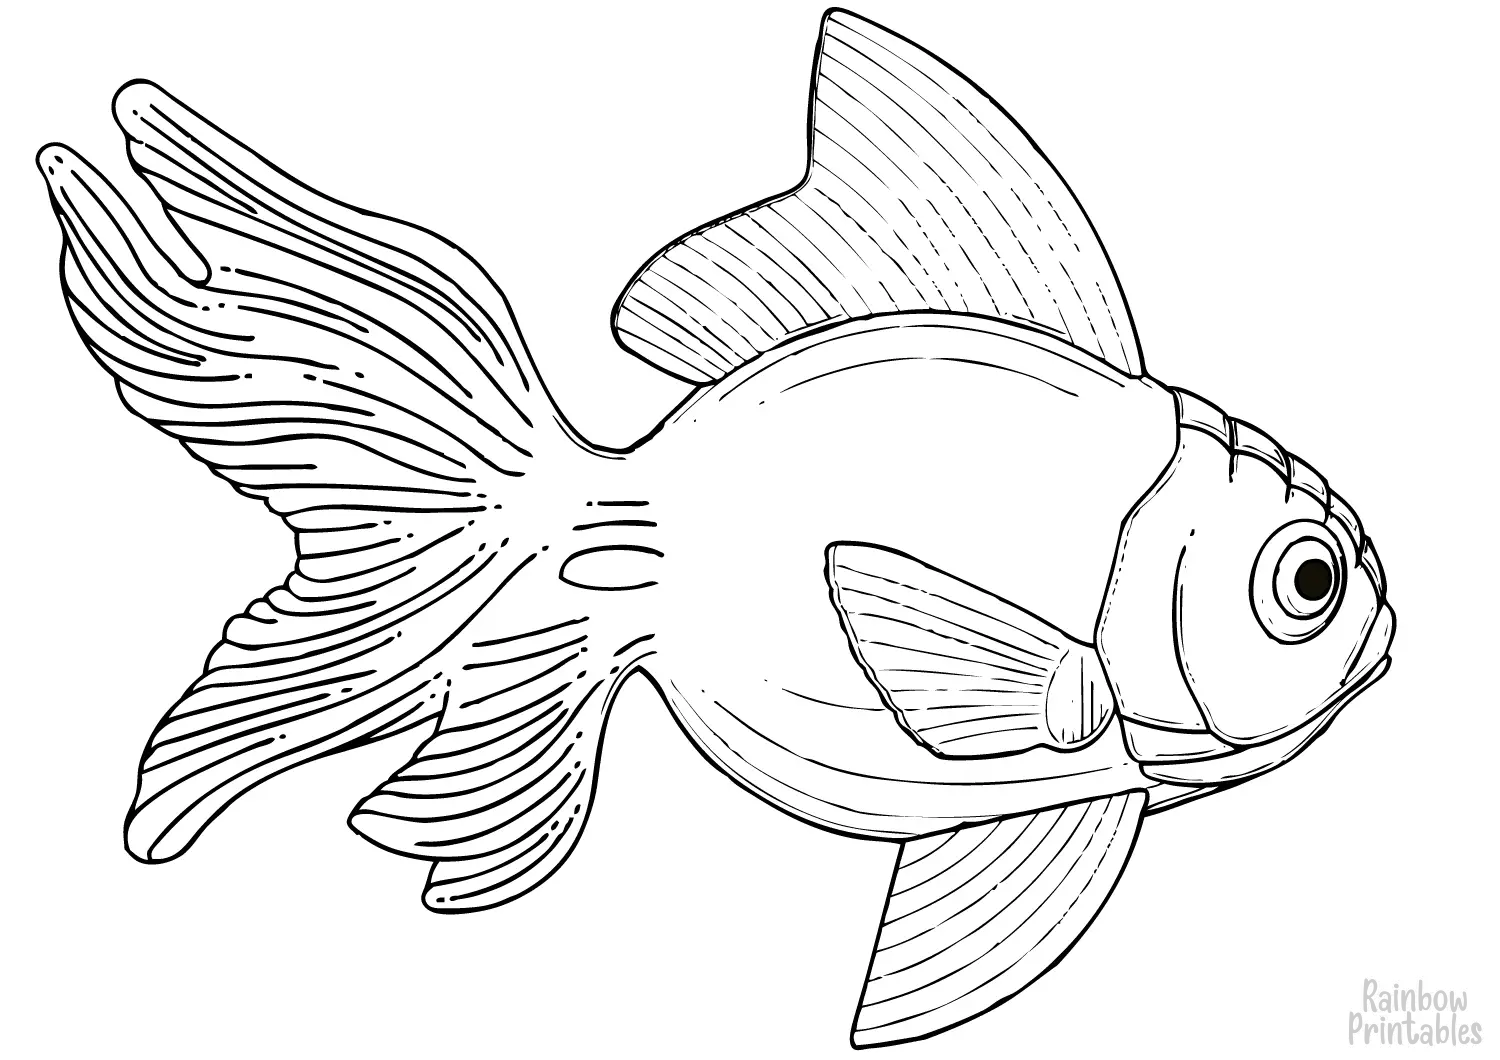 SIMPLE-EASY-line-drawings-GOLDFISH-coloring-page-for-kids